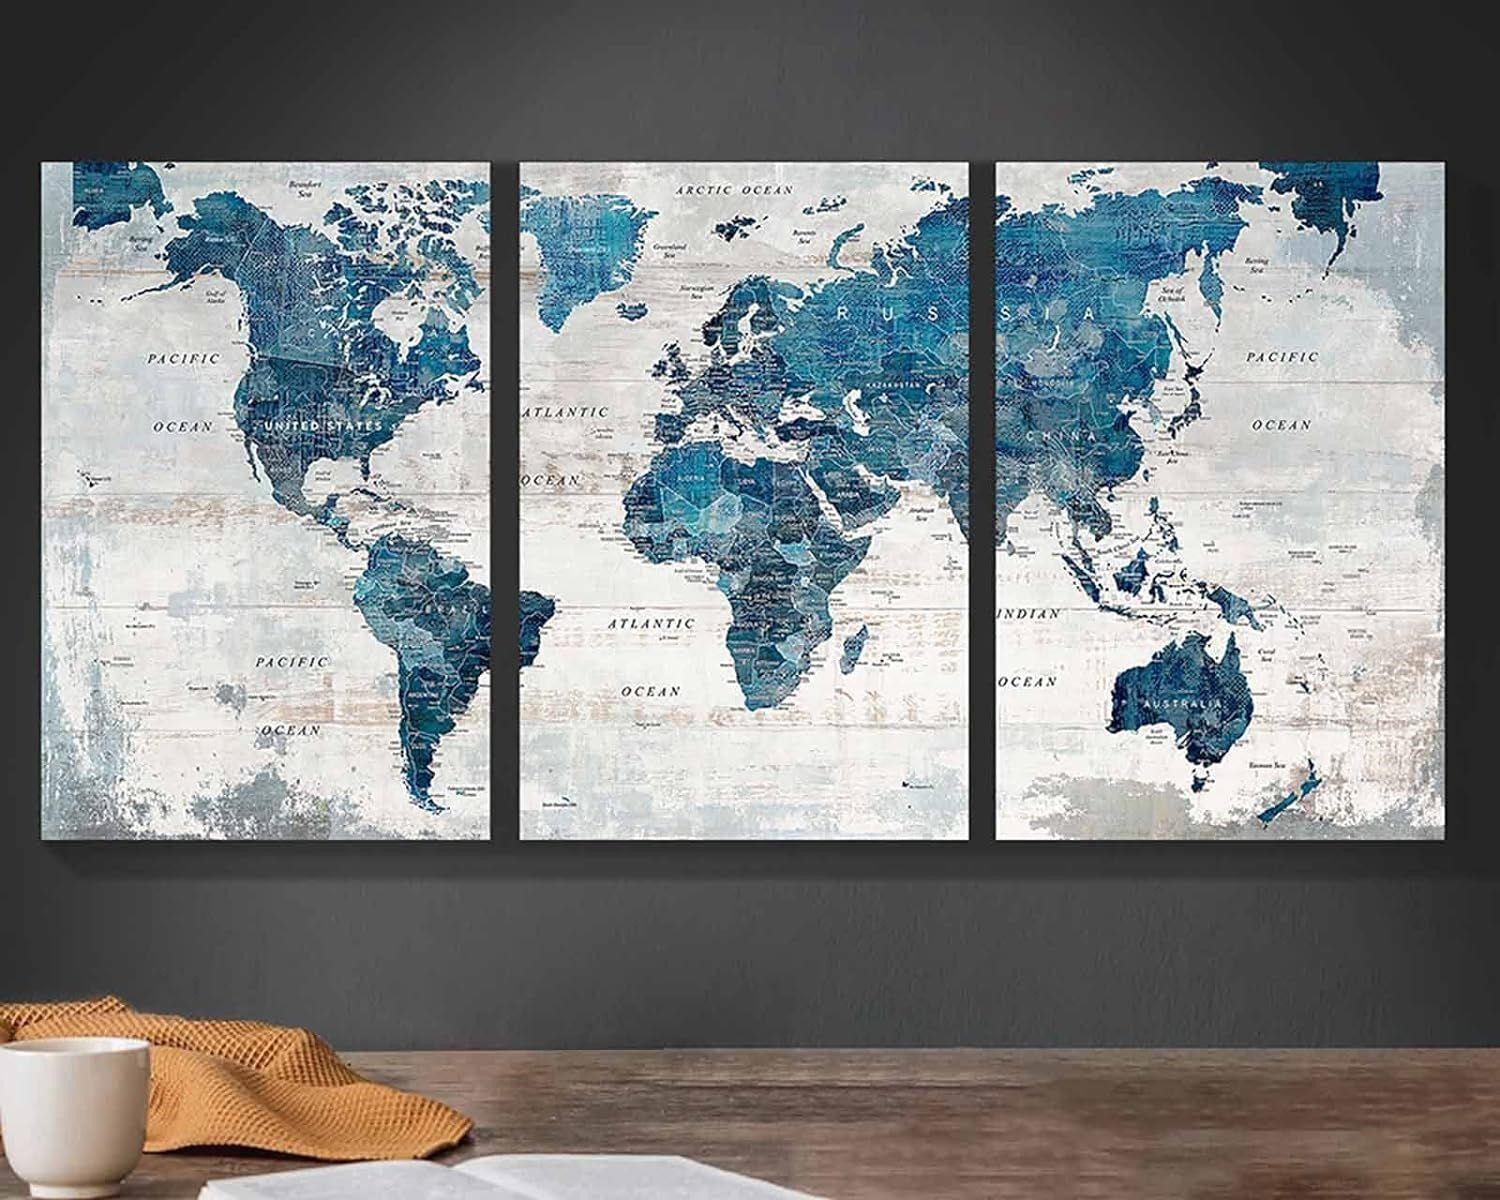 Wall Art for Living Room Office Wall Decor 48x24”